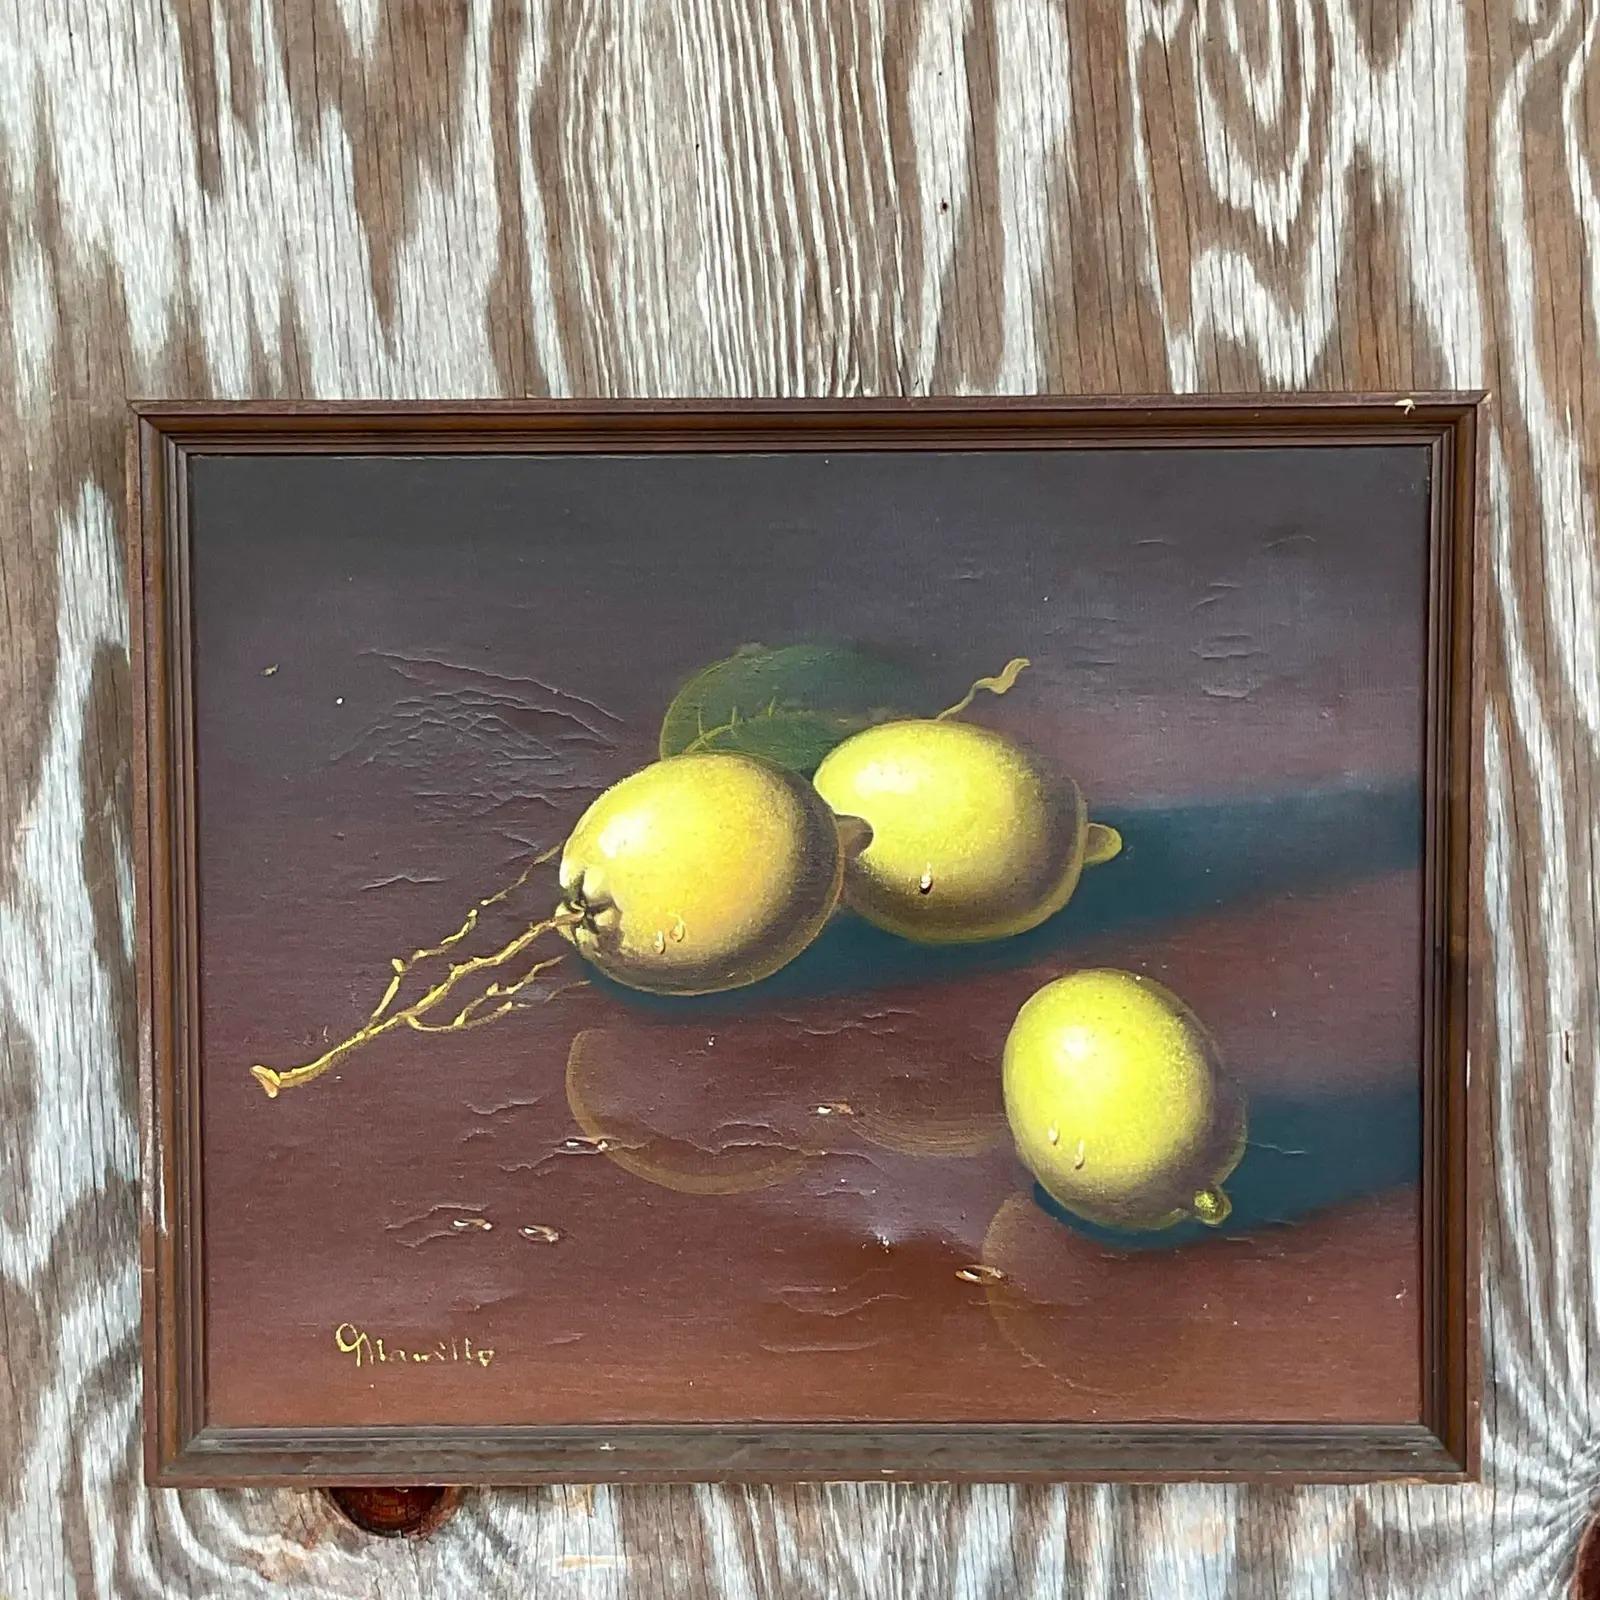 Fantastic vintage original oil painting. A beautiful period composition of lemons on a branch. Signed by the artist. Lots of great crackling and patina from time. Acquired from a Palm Beach estate.

The painting is in great vintage condition.